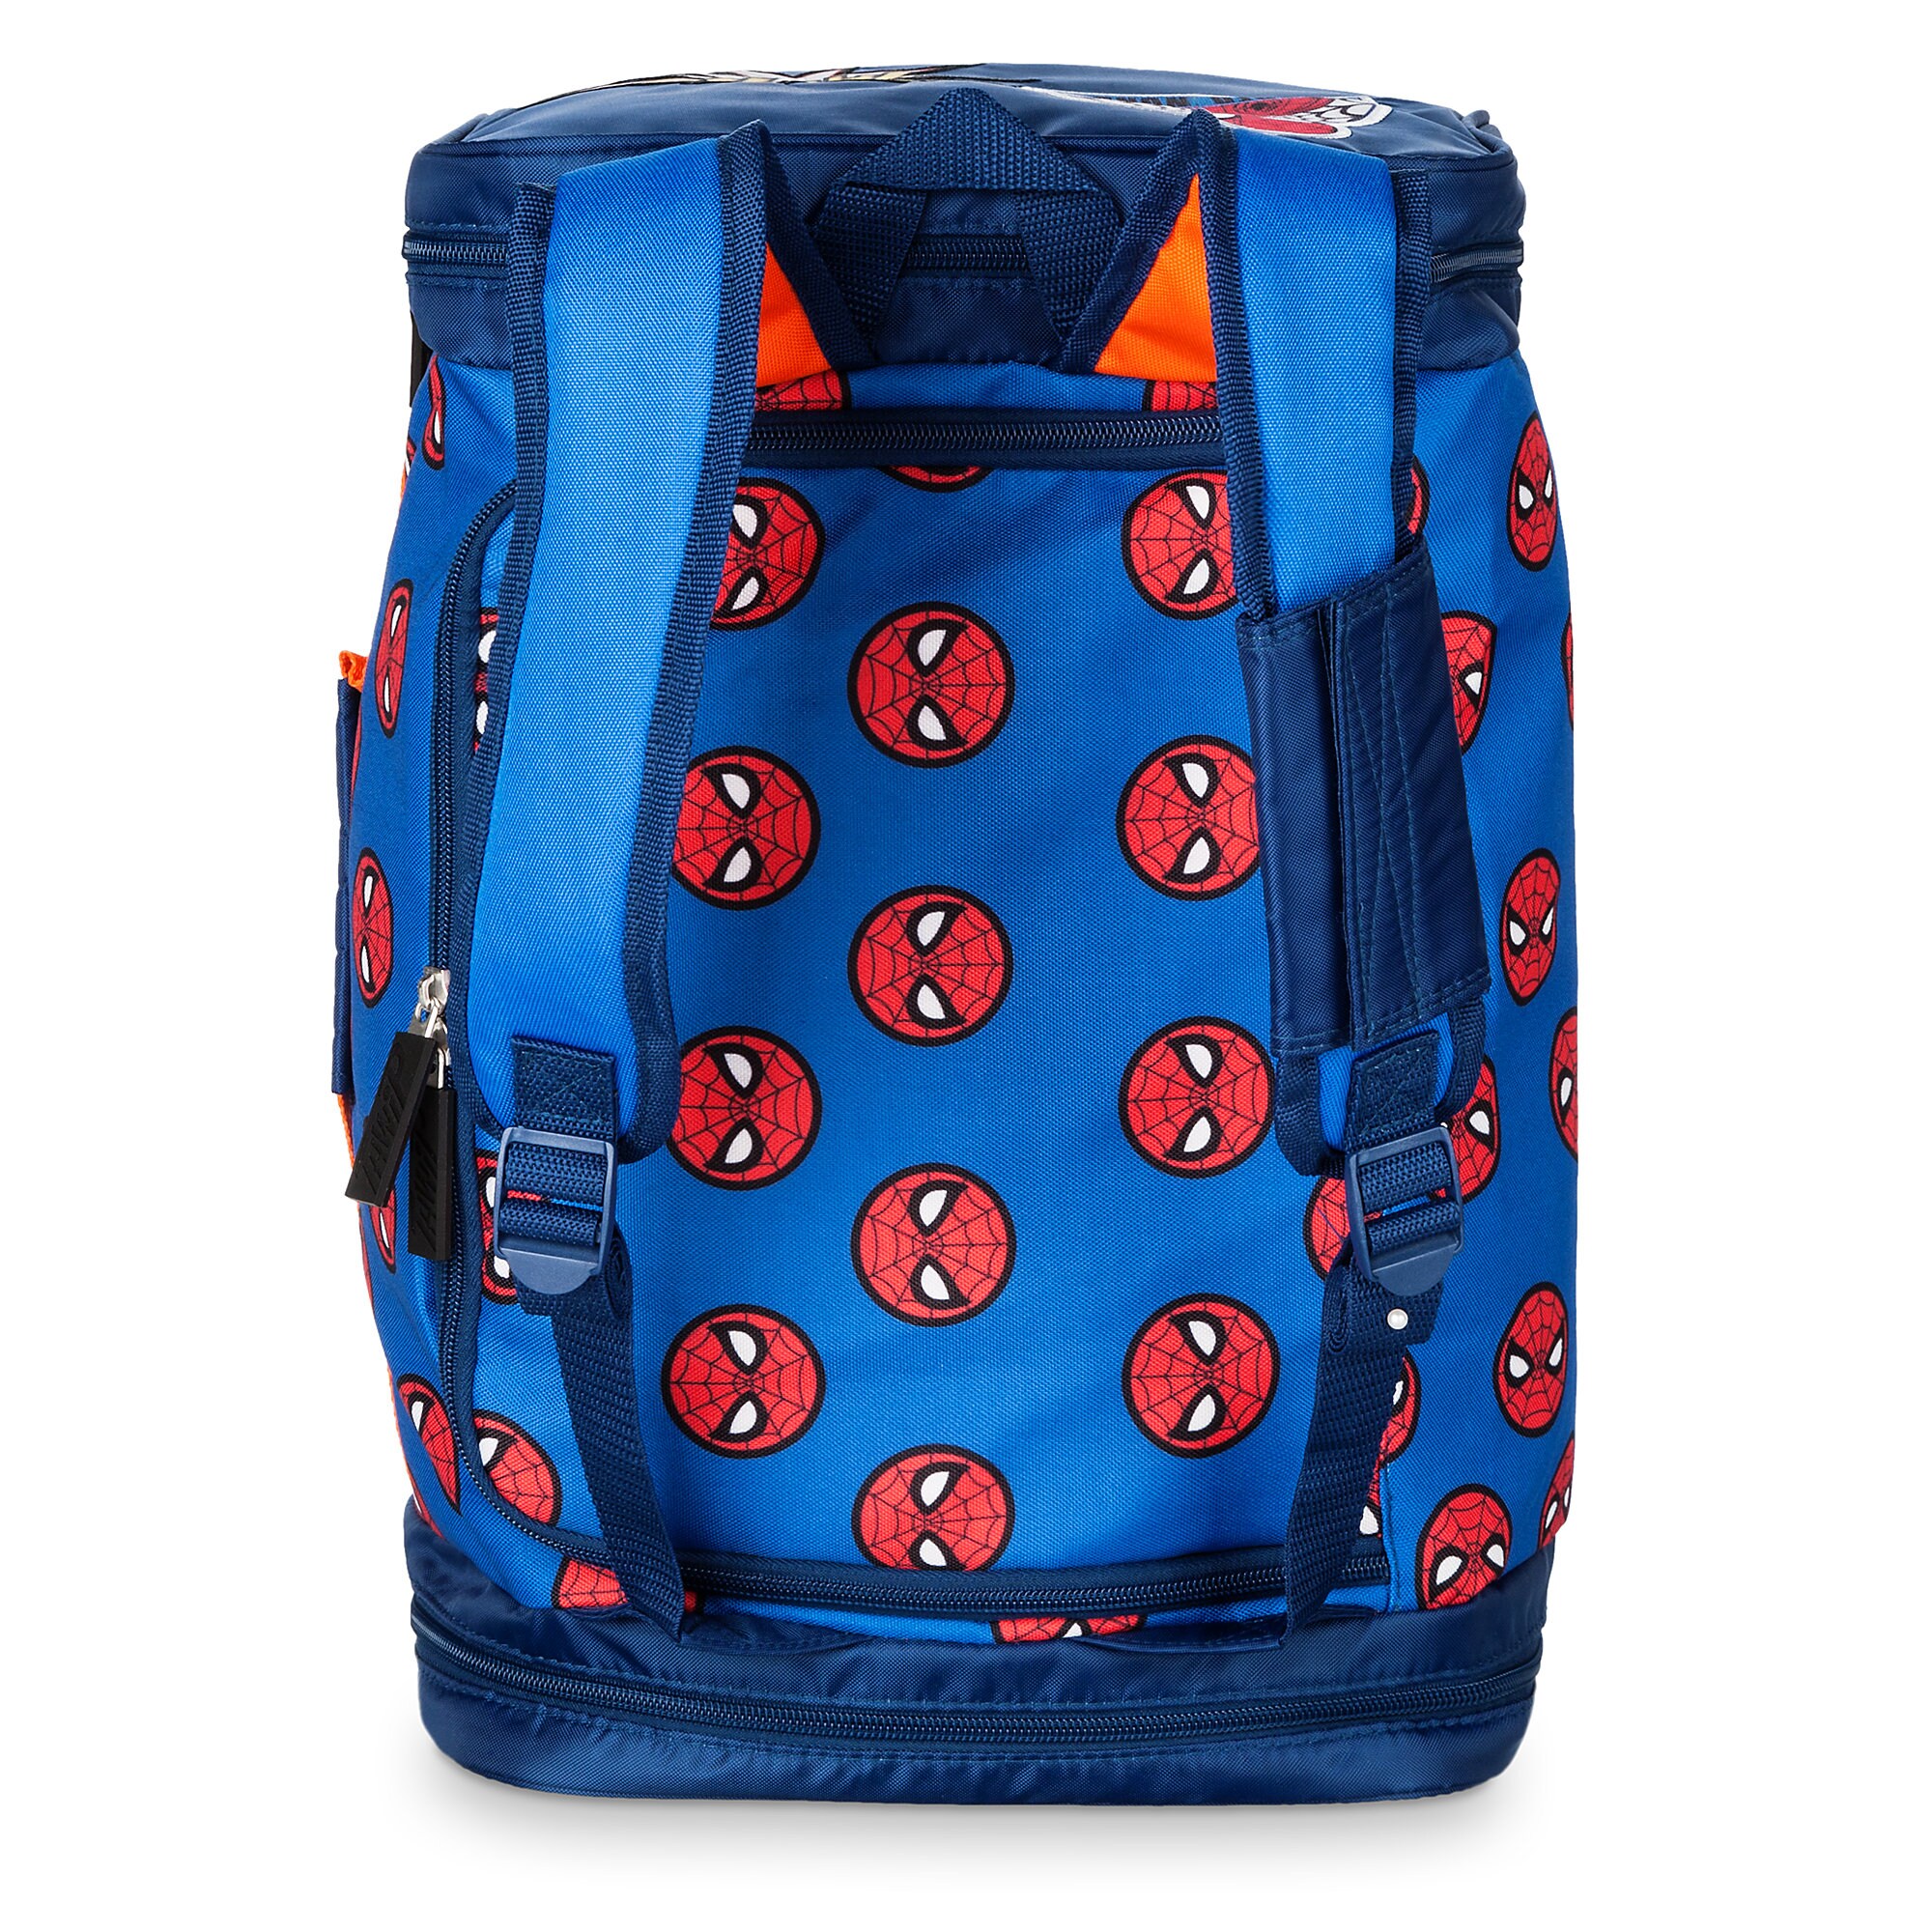 Spider-Man Duffle Bag for Kids